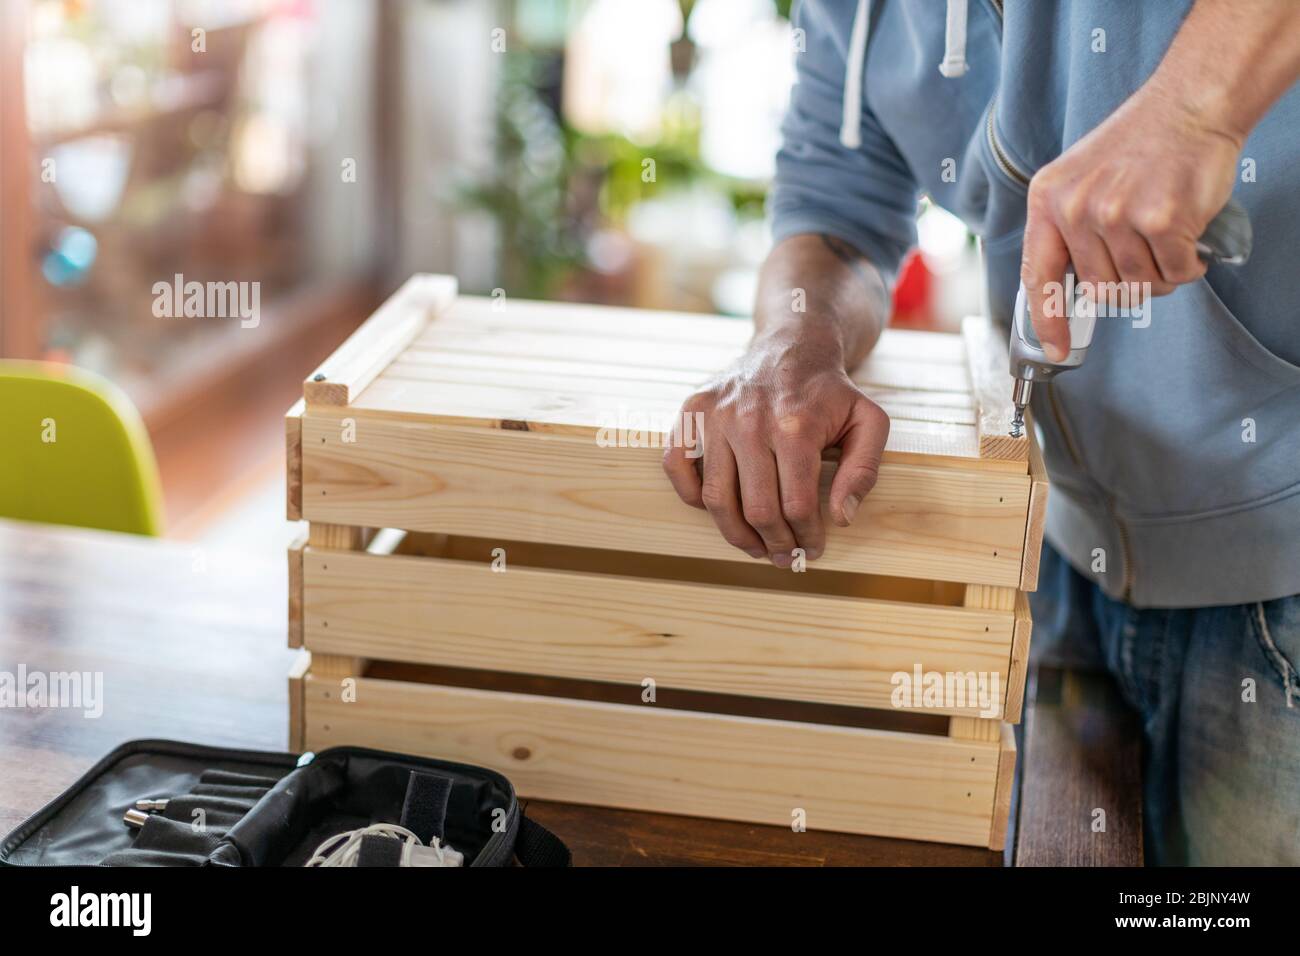 Man drilling wooden crate with power tool at home Stock Photo